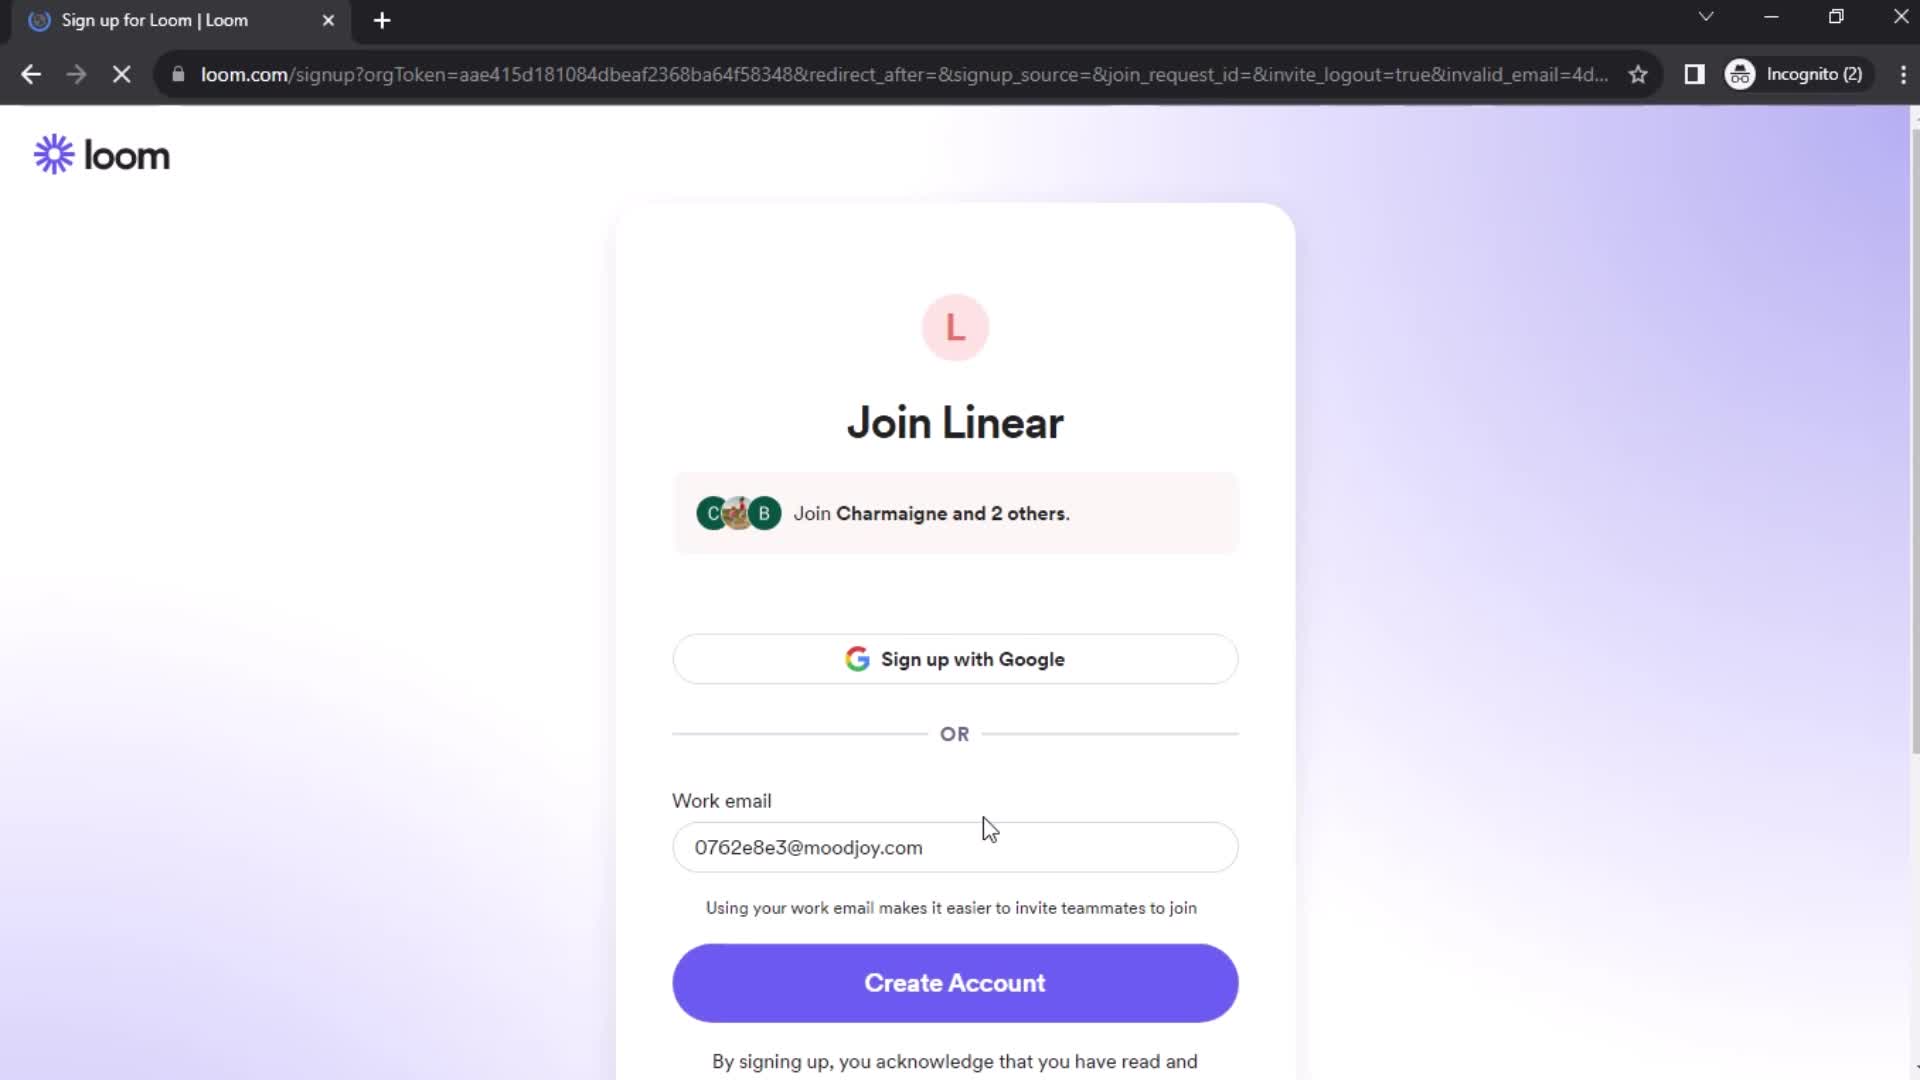 Screenshot of Sign up on Accepting an invite on Loom user flow